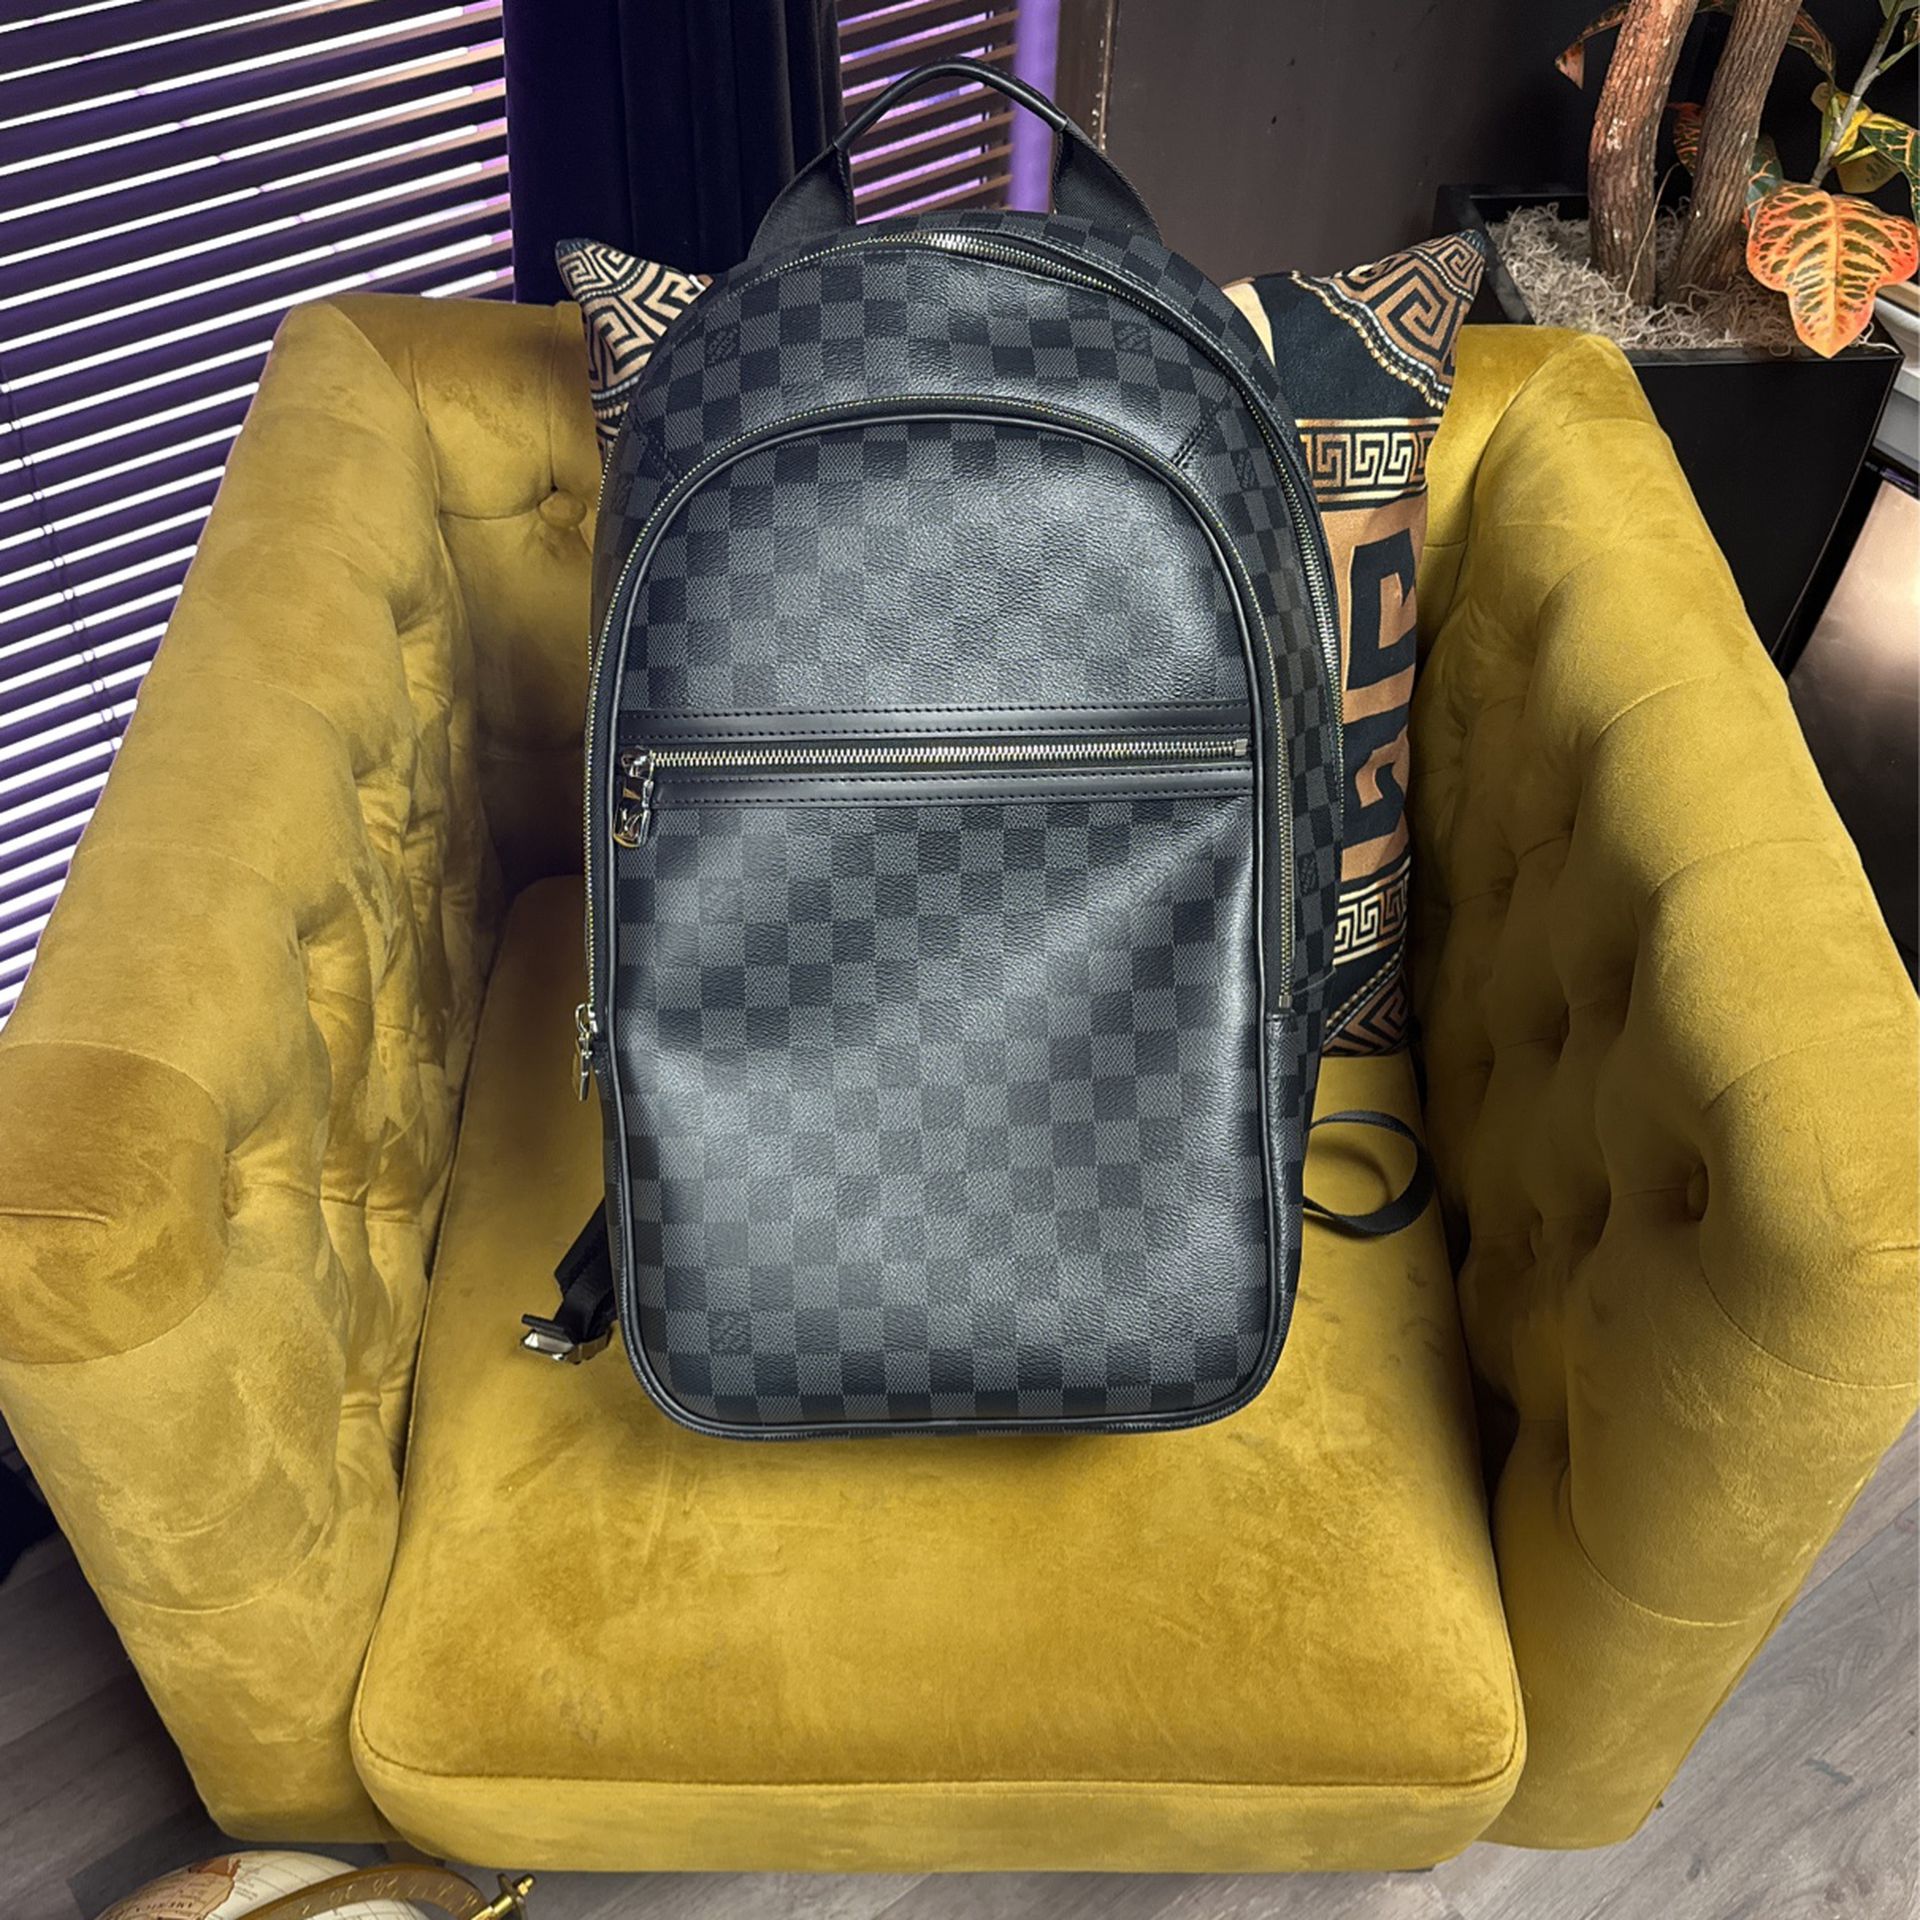 Lv Book bag for Sale in Lithonia, GA - OfferUp